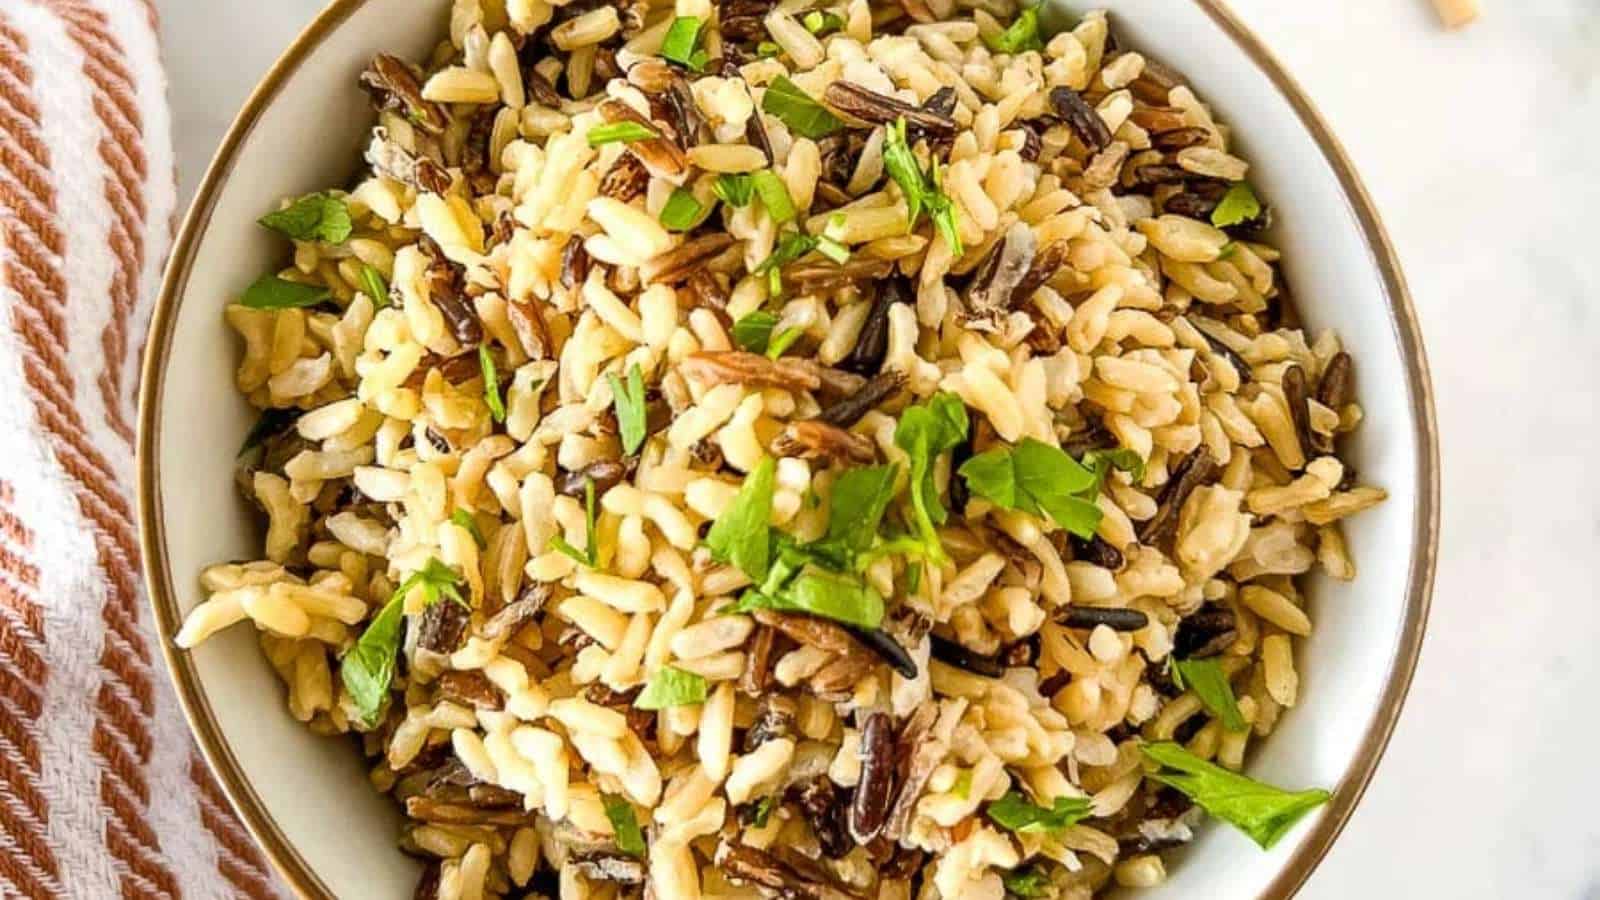 Wild rice salad in a white bowl.